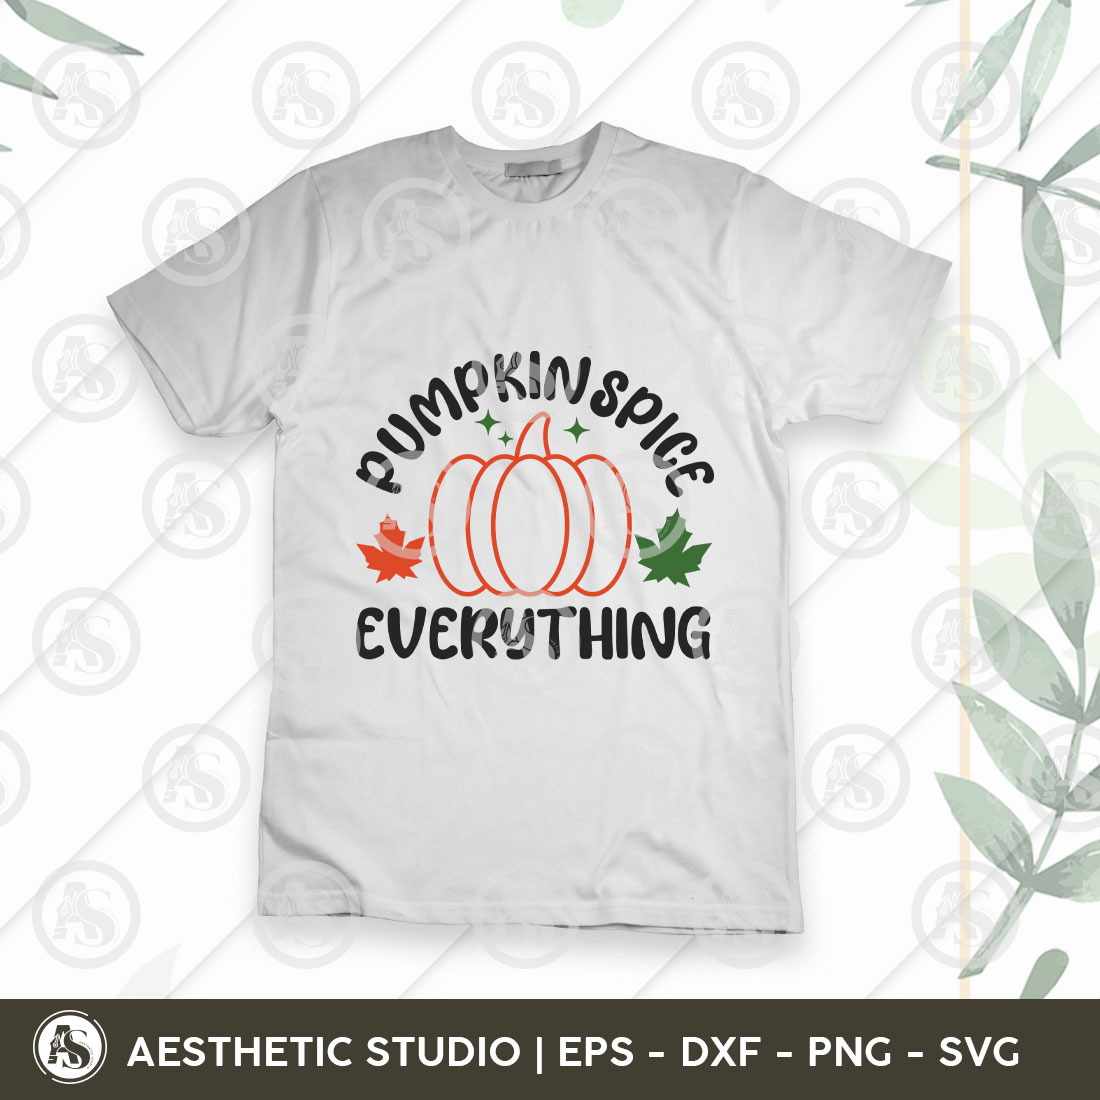 Pumpkin Spice Everything Svg, Fall Svg, Autumn Svg, Thanksgiving Svg, Grateful svg, Thanksgiving Quote, Cut Files for Cricut, Thankful Svg, Pumpkin svg, Turkey svg, Gobble Svg, Pumpkin Spice, Fall Leaves Svg, Fall Vibes Svg, Everything Svg, Thanksgiving Shirt, Thanksgiving png, Thanksgiving eps, Thanksgiving day, gift for Thanksgiving, holidays, celebrate, Cut Files preview image.